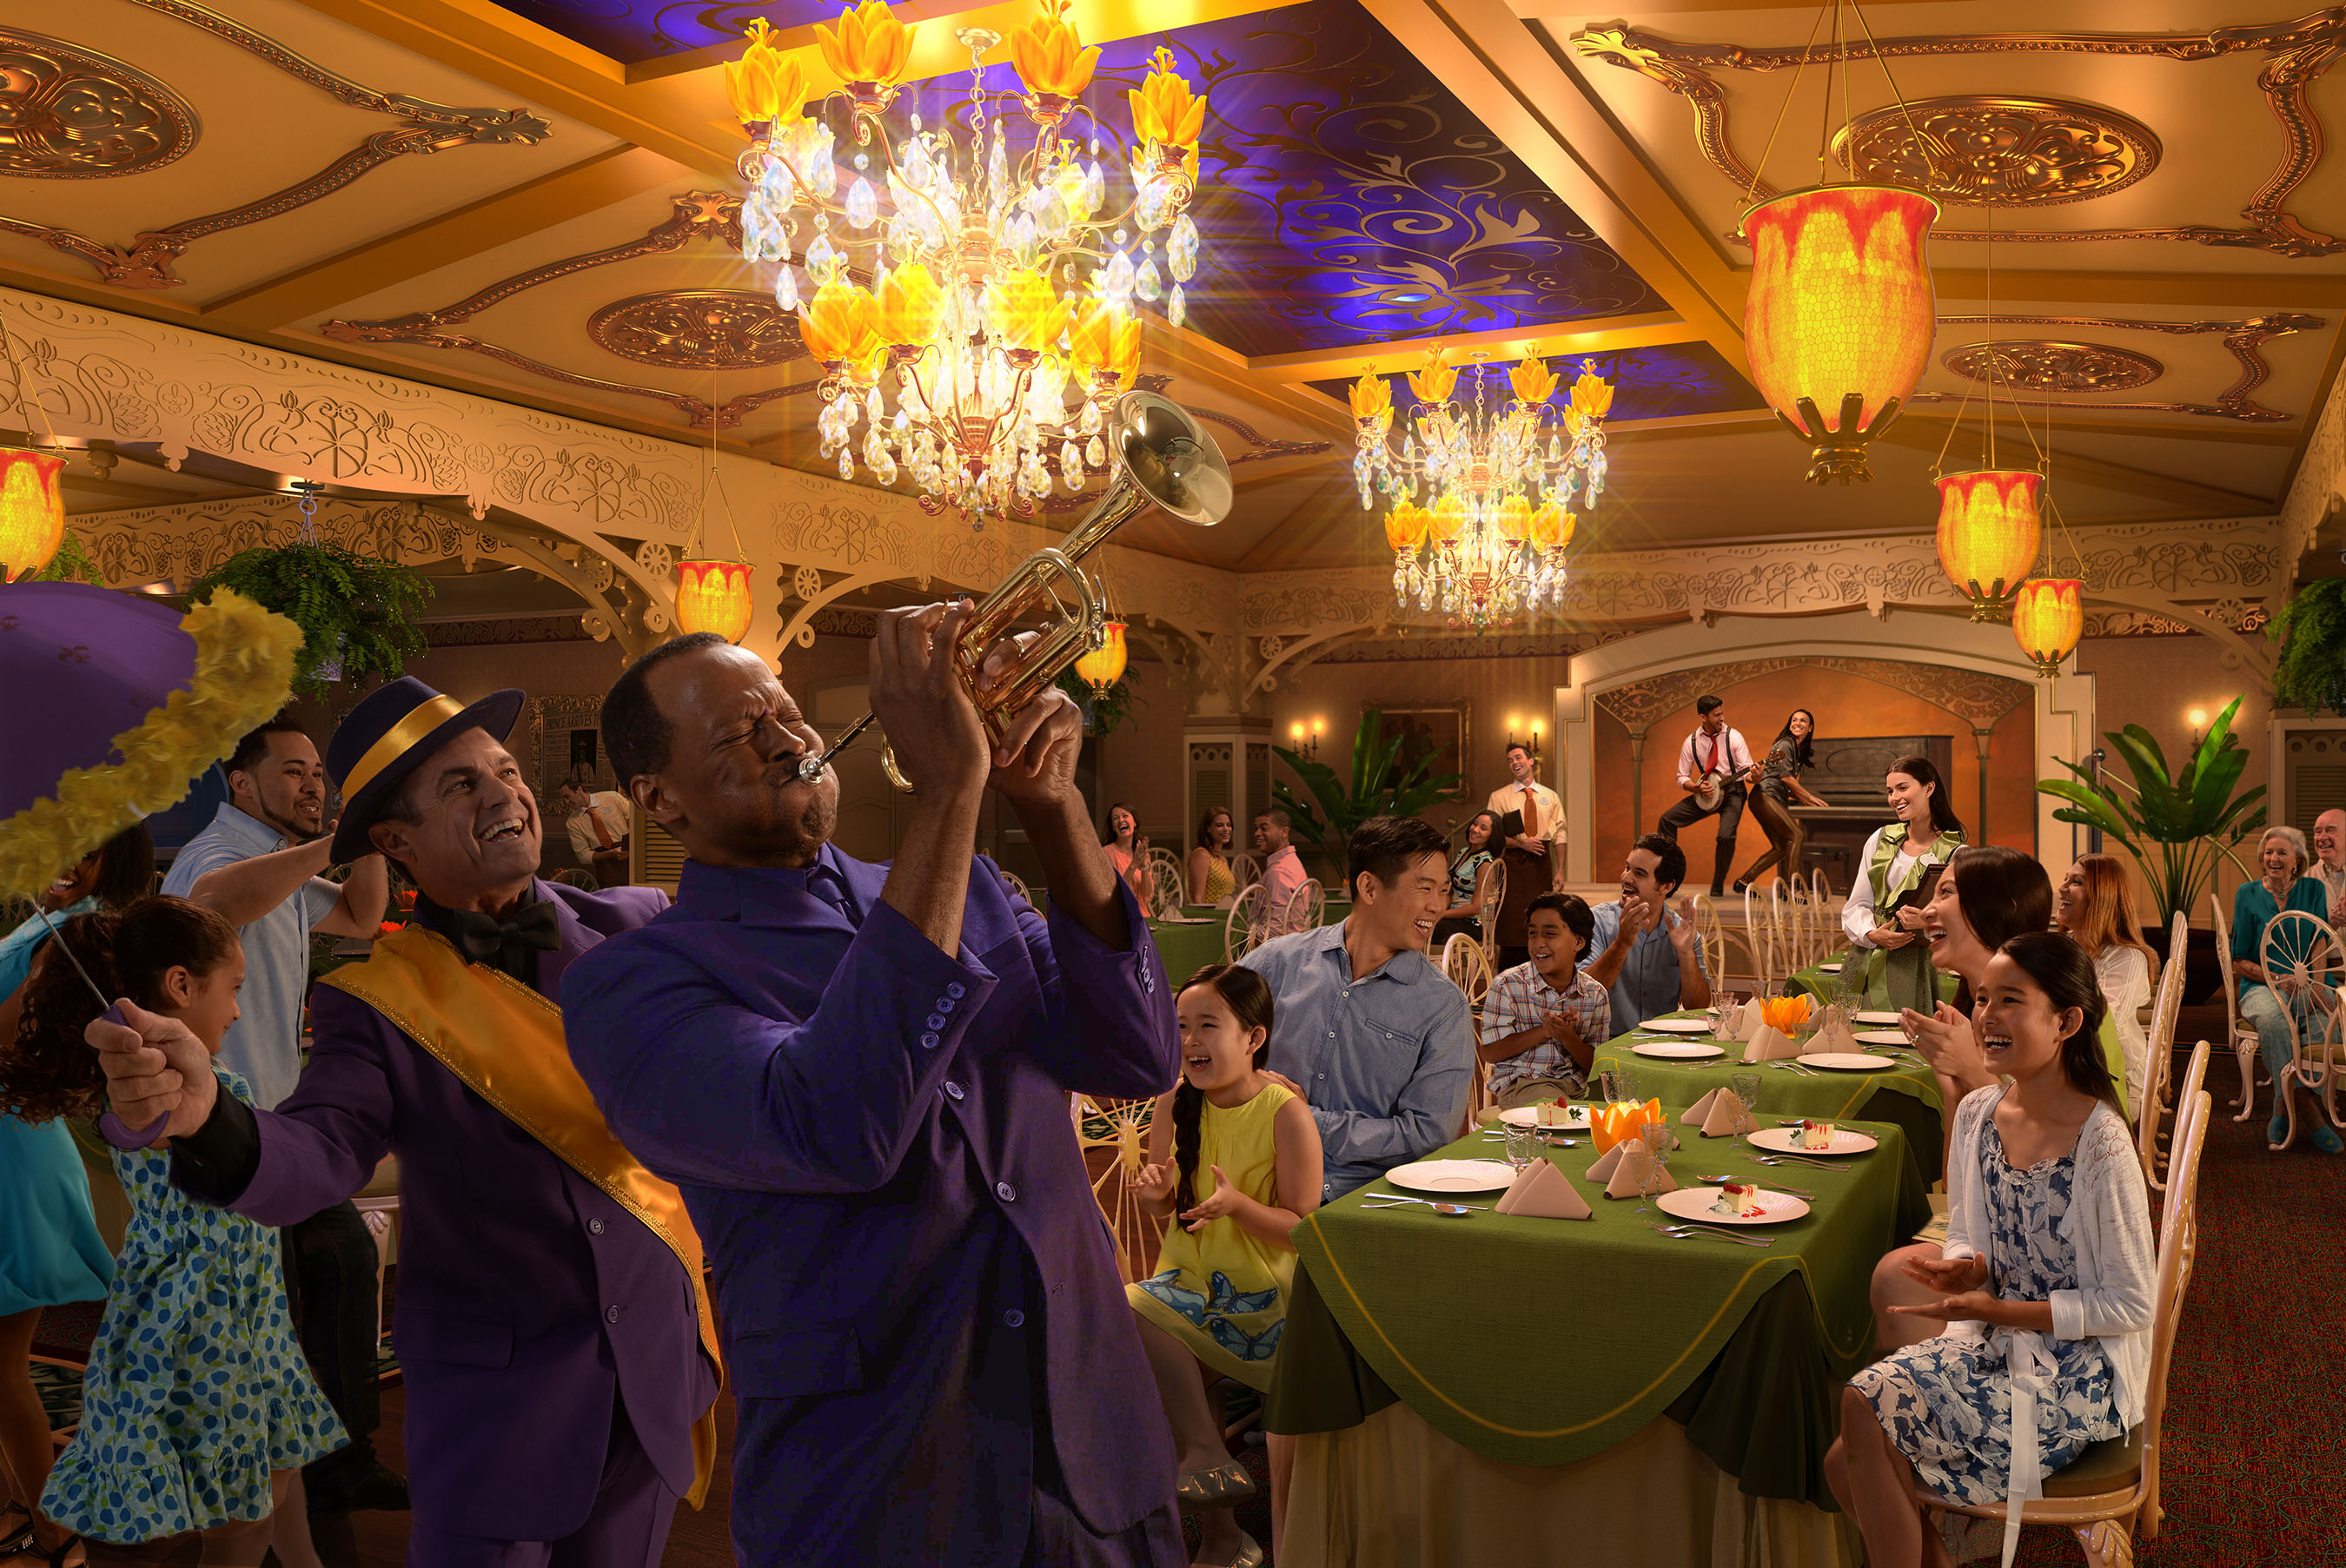 Exclusive to the Disney Wonder, Tiana’s Place restaurant is inspired by Princess Tiana from the Disney animated feature, “The Princess and the Frog.” The new restaurant will transport guests to an era of southern charm, spirited jazz and street party celebrations. Influenced by southern-style cuisine, chefs will cook up Tiana’s recipes, drawing inspiration from the flavors and ingredients of the Louisiana bayou. (Photo illustration, Disney)